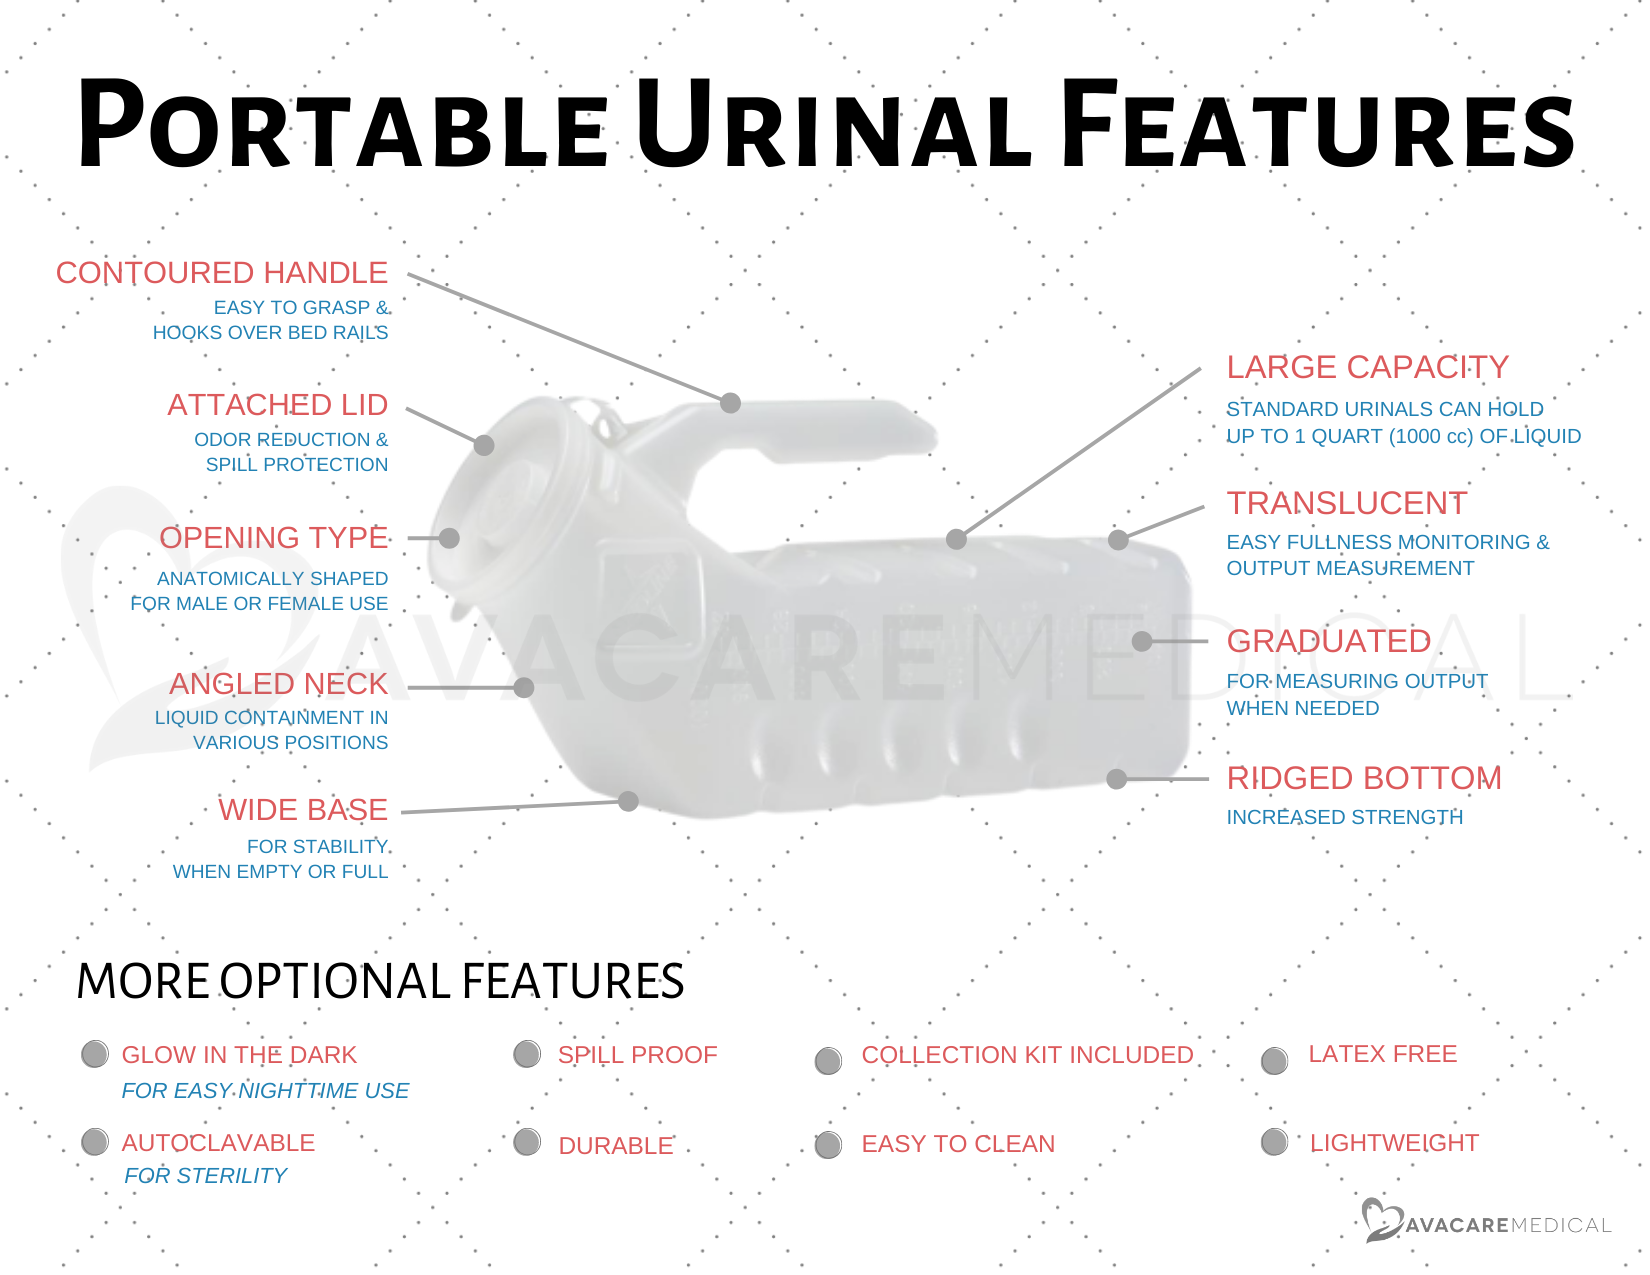 Portable Urinal Features: Contoured handle, attached lid, opening type, angled neck, wide base, large capacity, translucent, graduated, ridged bottom and more!